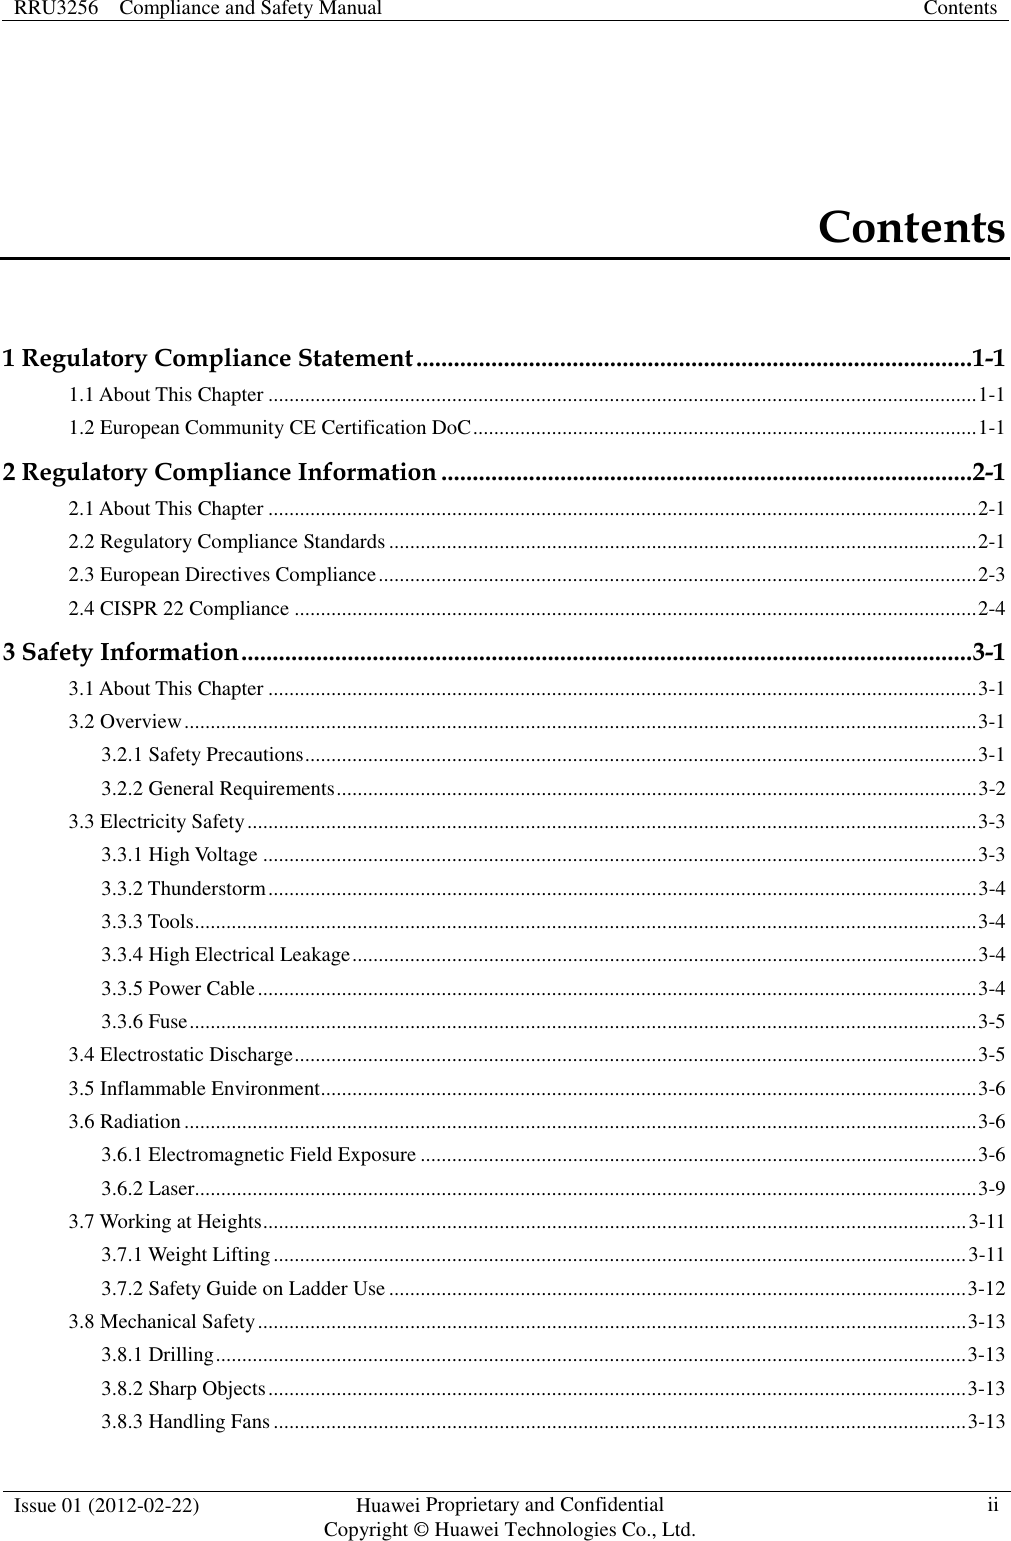 RRU3256    Compliance and Safety Manual  Contents  Issue 01 (2012-02-22)  Huawei Proprietary and Confidential           Copyright © Huawei Technologies Co., Ltd. ii  Contents 1 Regulatory Compliance Statement ......................................................................................... 1-1 1.1 About This Chapter ....................................................................................................................................... 1-1 1.2 European Community CE Certification DoC ................................................................................................ 1-1 2 Regulatory Compliance Information ..................................................................................... 2-1 2.1 About This Chapter ....................................................................................................................................... 2-1 2.2 Regulatory Compliance Standards ................................................................................................................ 2-1 2.3 European Directives Compliance .................................................................................................................. 2-3 2.4 CISPR 22 Compliance .................................................................................................................................. 2-4 3 Safety Information ..................................................................................................................... 3-1 3.1 About This Chapter ....................................................................................................................................... 3-1 3.2 Overview ....................................................................................................................................................... 3-1 3.2.1 Safety Precautions ................................................................................................................................ 3-1 3.2.2 General Requirements .......................................................................................................................... 3-2 3.3 Electricity Safety ........................................................................................................................................... 3-3 3.3.1 High Voltage ........................................................................................................................................ 3-3 3.3.2 Thunderstorm ....................................................................................................................................... 3-4 3.3.3 Tools ..................................................................................................................................................... 3-4 3.3.4 High Electrical Leakage ....................................................................................................................... 3-4 3.3.5 Power Cable ......................................................................................................................................... 3-4 3.3.6 Fuse ...................................................................................................................................................... 3-5 3.4 Electrostatic Discharge .................................................................................................................................. 3-5 3.5 Inflammable Environment ............................................................................................................................. 3-6 3.6 Radiation ....................................................................................................................................................... 3-6 3.6.1 Electromagnetic Field Exposure .......................................................................................................... 3-6 3.6.2 Laser..................................................................................................................................................... 3-9 3.7 Working at Heights ...................................................................................................................................... 3-11 3.7.1 Weight Lifting .................................................................................................................................... 3-11 3.7.2 Safety Guide on Ladder Use .............................................................................................................. 3-12 3.8 Mechanical Safety ....................................................................................................................................... 3-13 3.8.1 Drilling ............................................................................................................................................... 3-13 3.8.2 Sharp Objects ..................................................................................................................................... 3-13 3.8.3 Handling Fans .................................................................................................................................... 3-13 